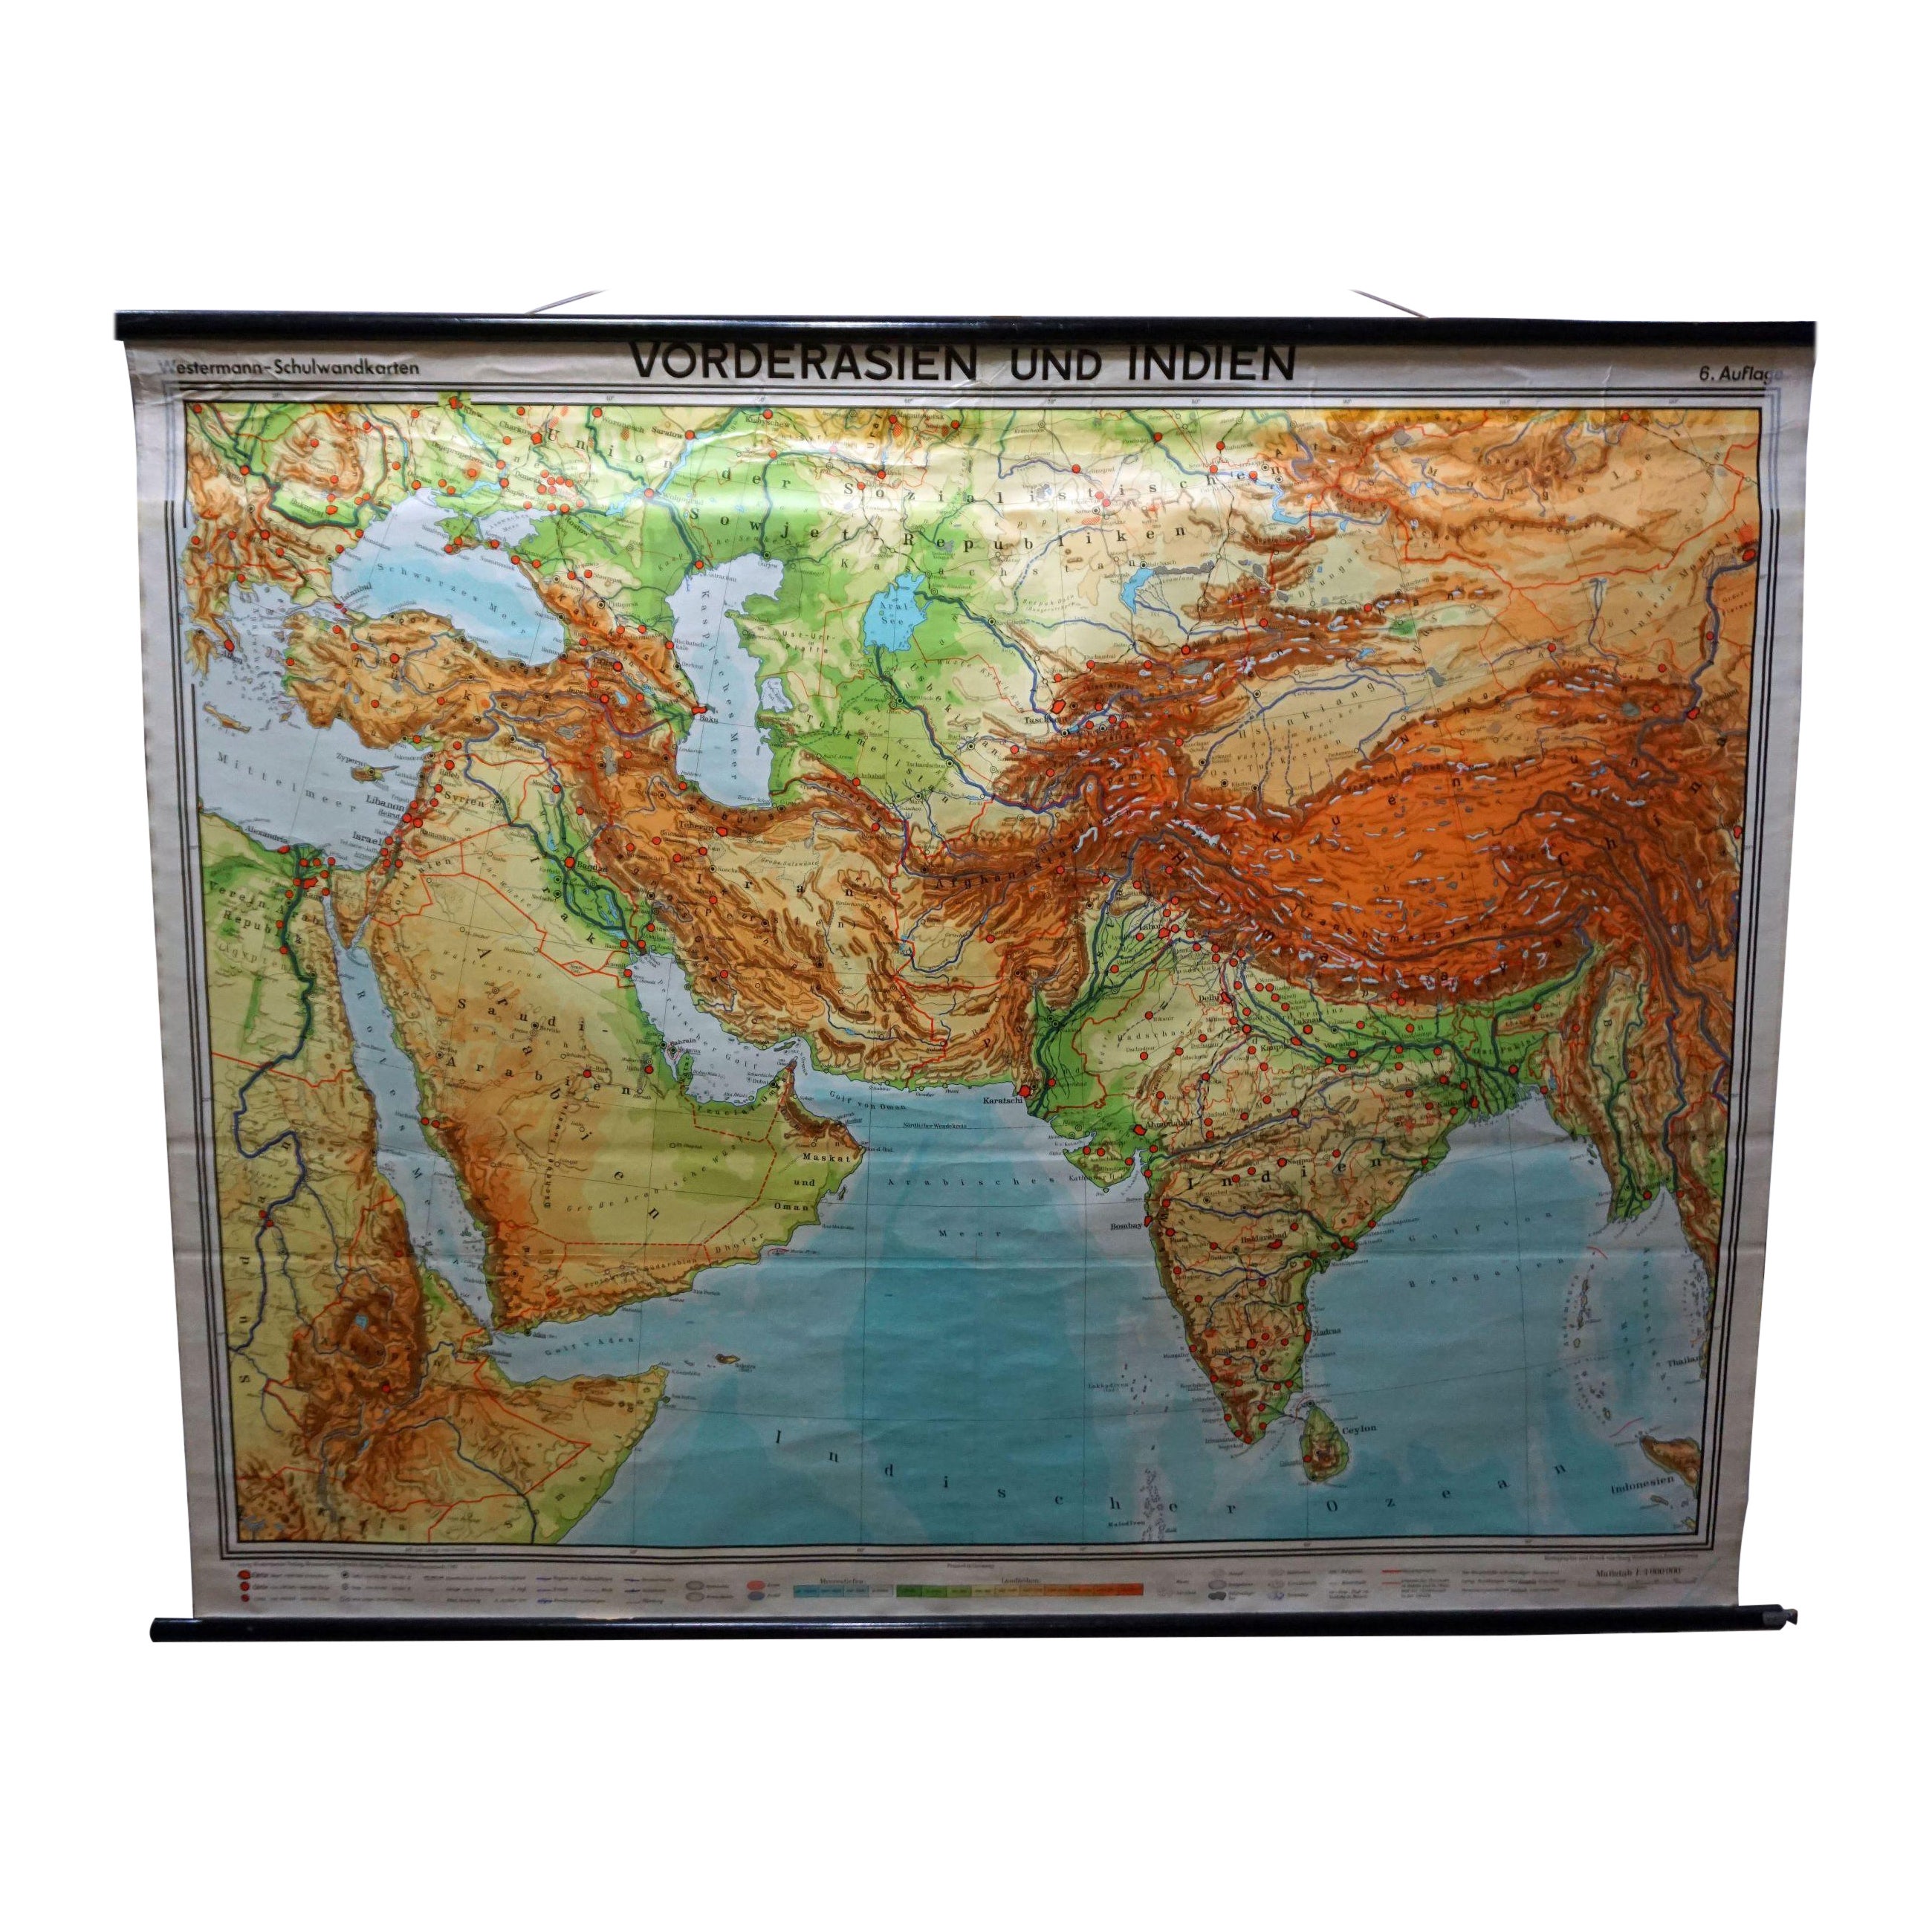 Middle East Saudia Arabia Israel India Map Rollable Mural Vintage Wall Chart